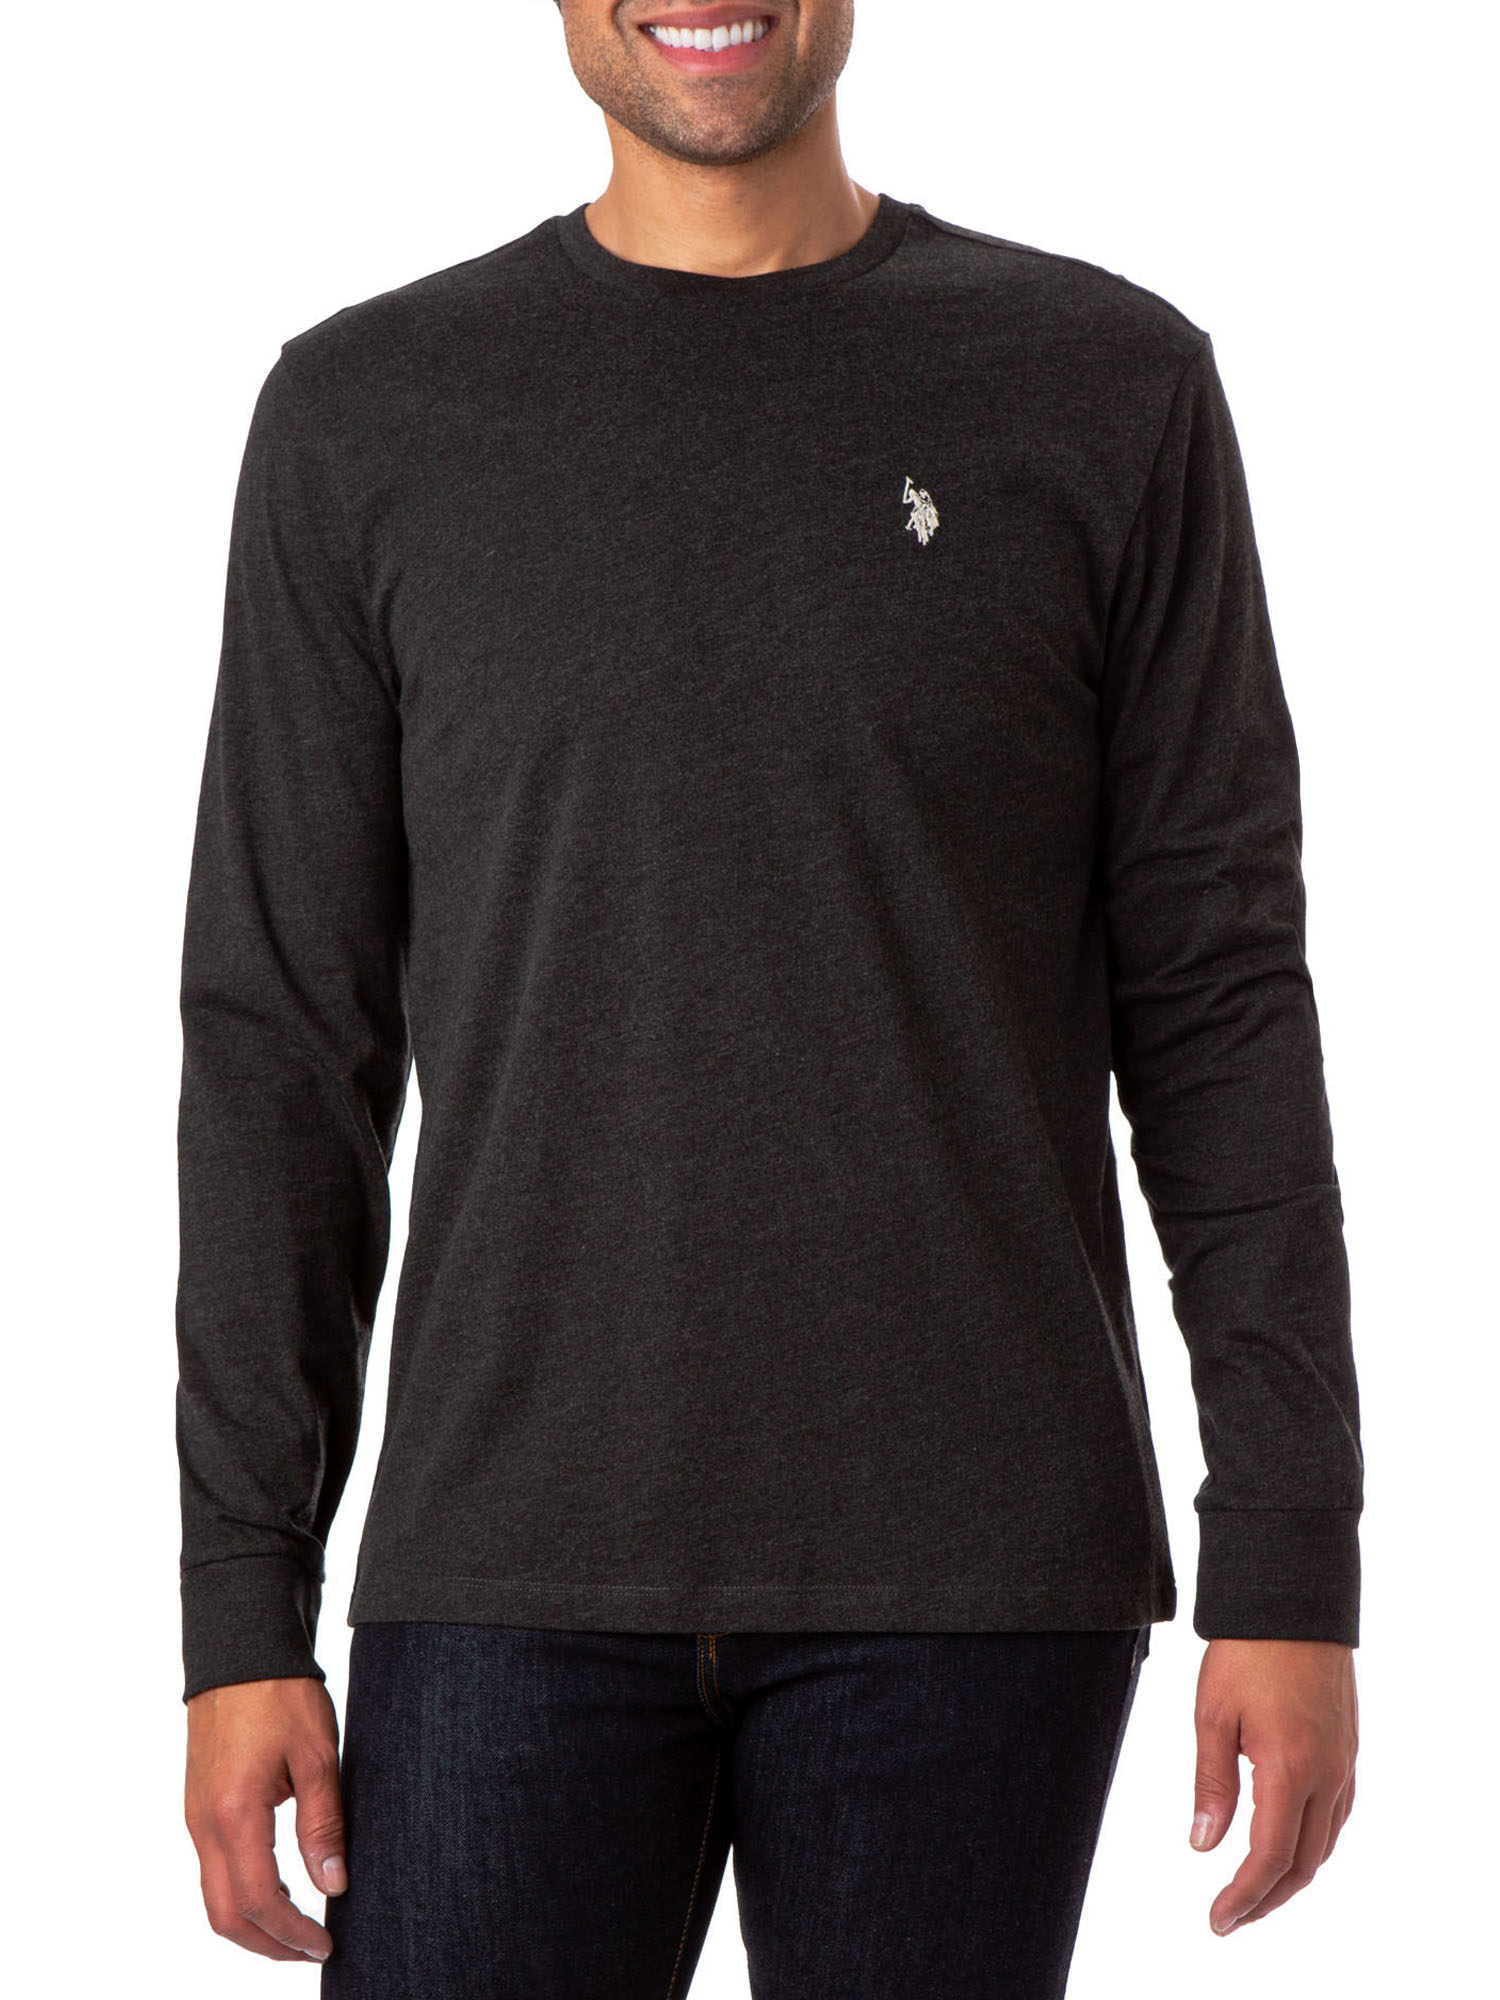 U.S. Polo Assn. Men's Long Sleeve Solid T-Shirt - image 1 of 3